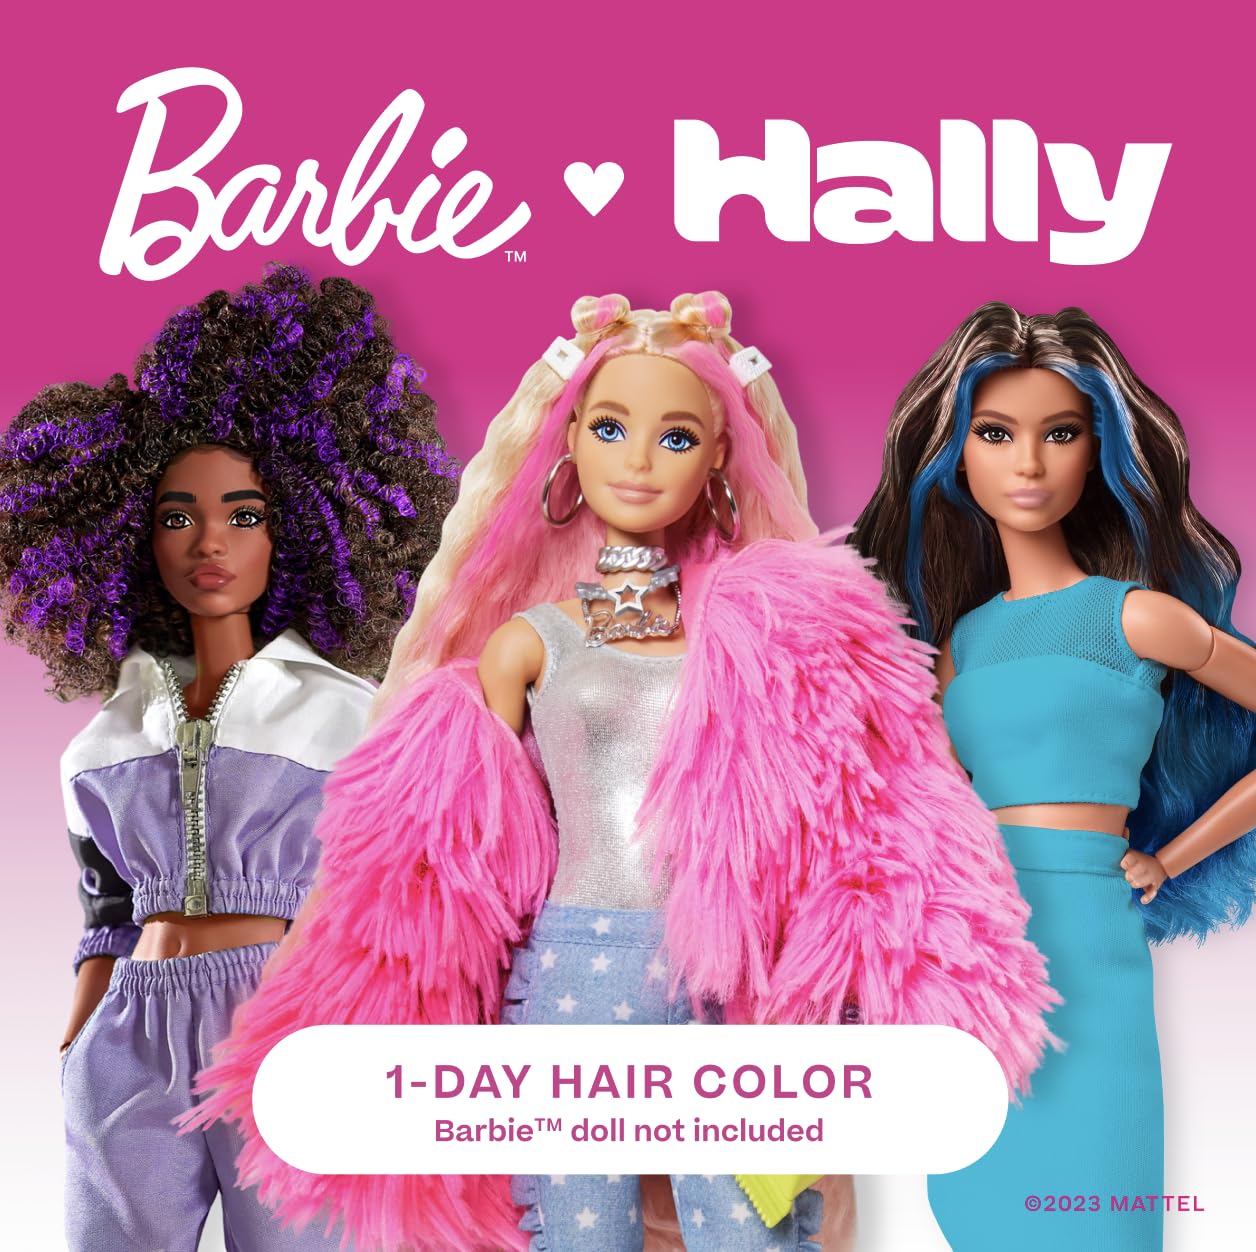 Barbie x Hally Temporary Hair Color for Kids | Pink Barbie Hair Dye | Barbie Hair Accessories for Women & Girls | Barbie Makeup for Hair | Barbie Movie Merch | Barbie Clothes & Shirt Accessory with Hair Clips | One-Day Washable Hair Color